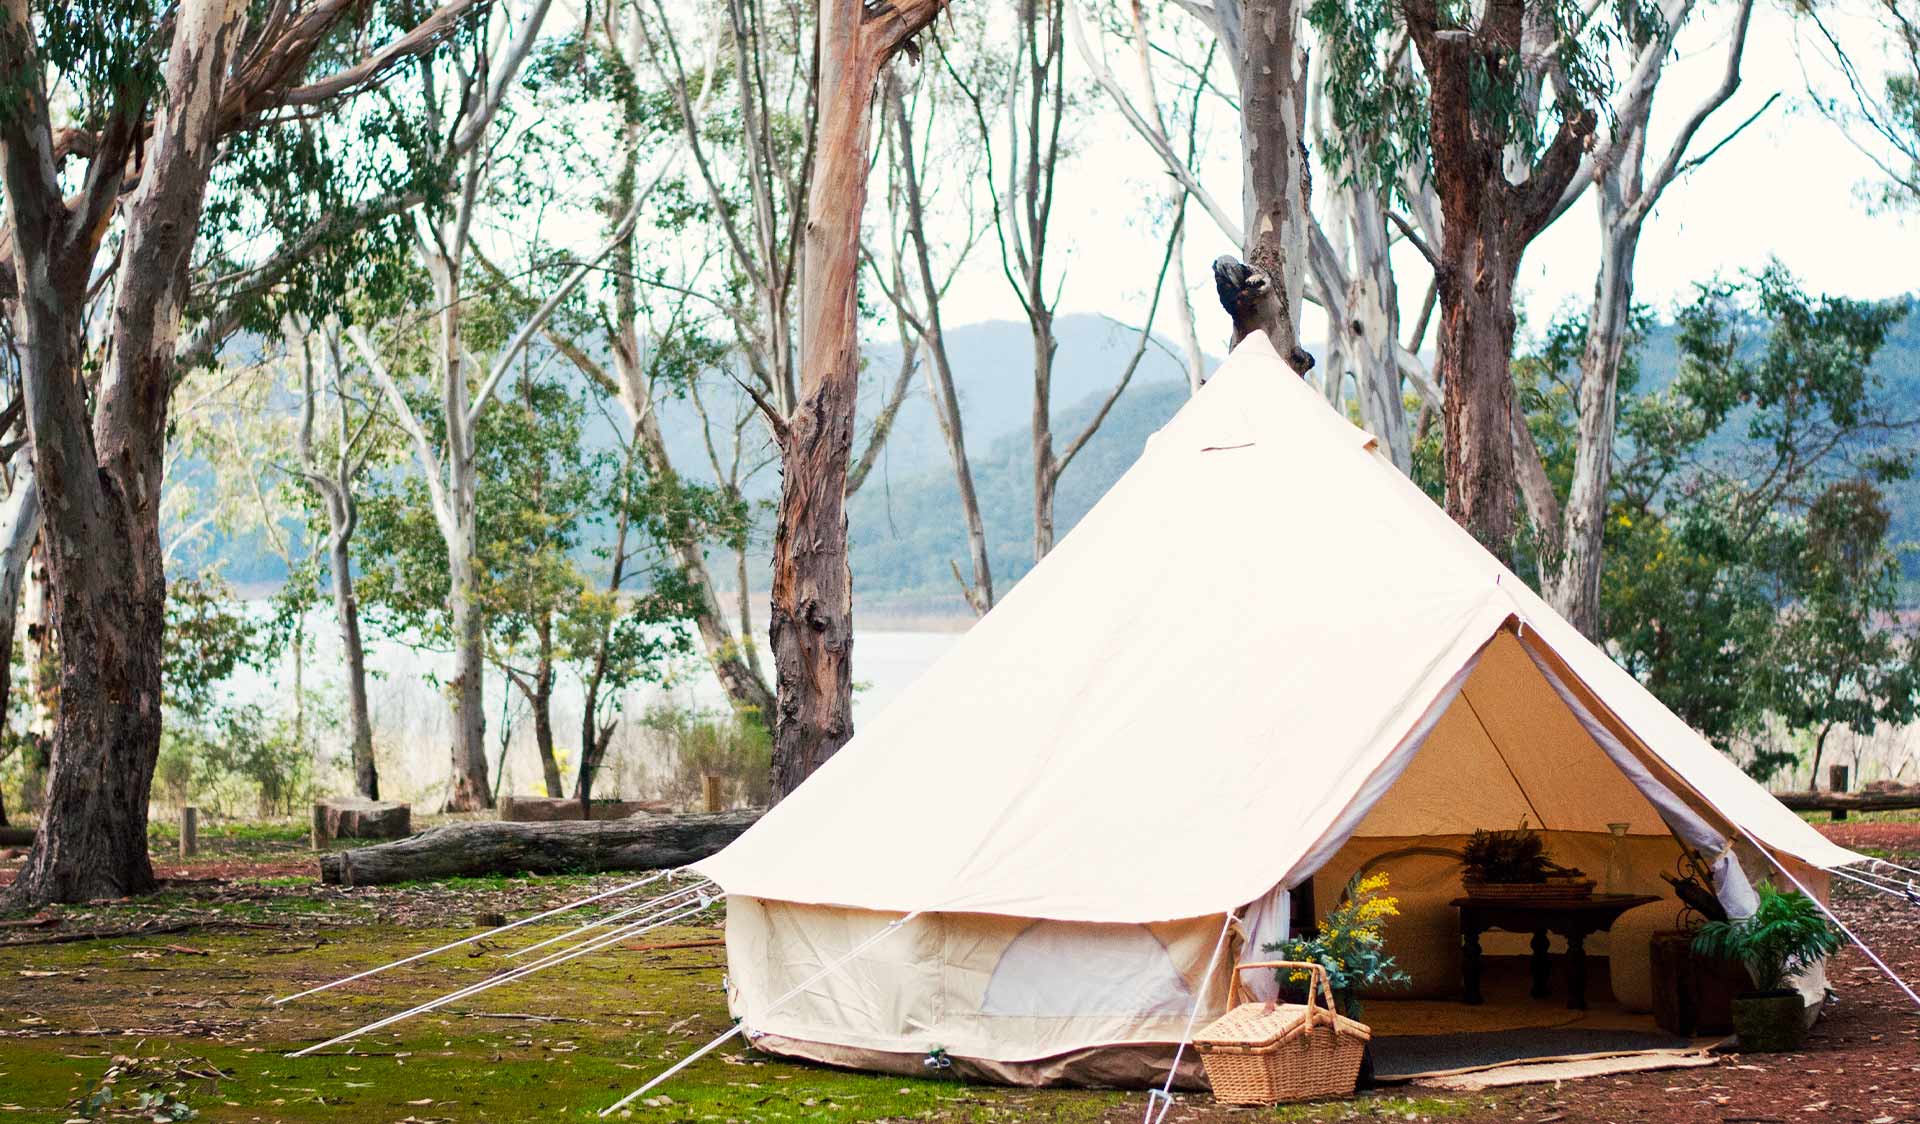 A canvas bell tent sits open with a lake visible in the background behind some trees